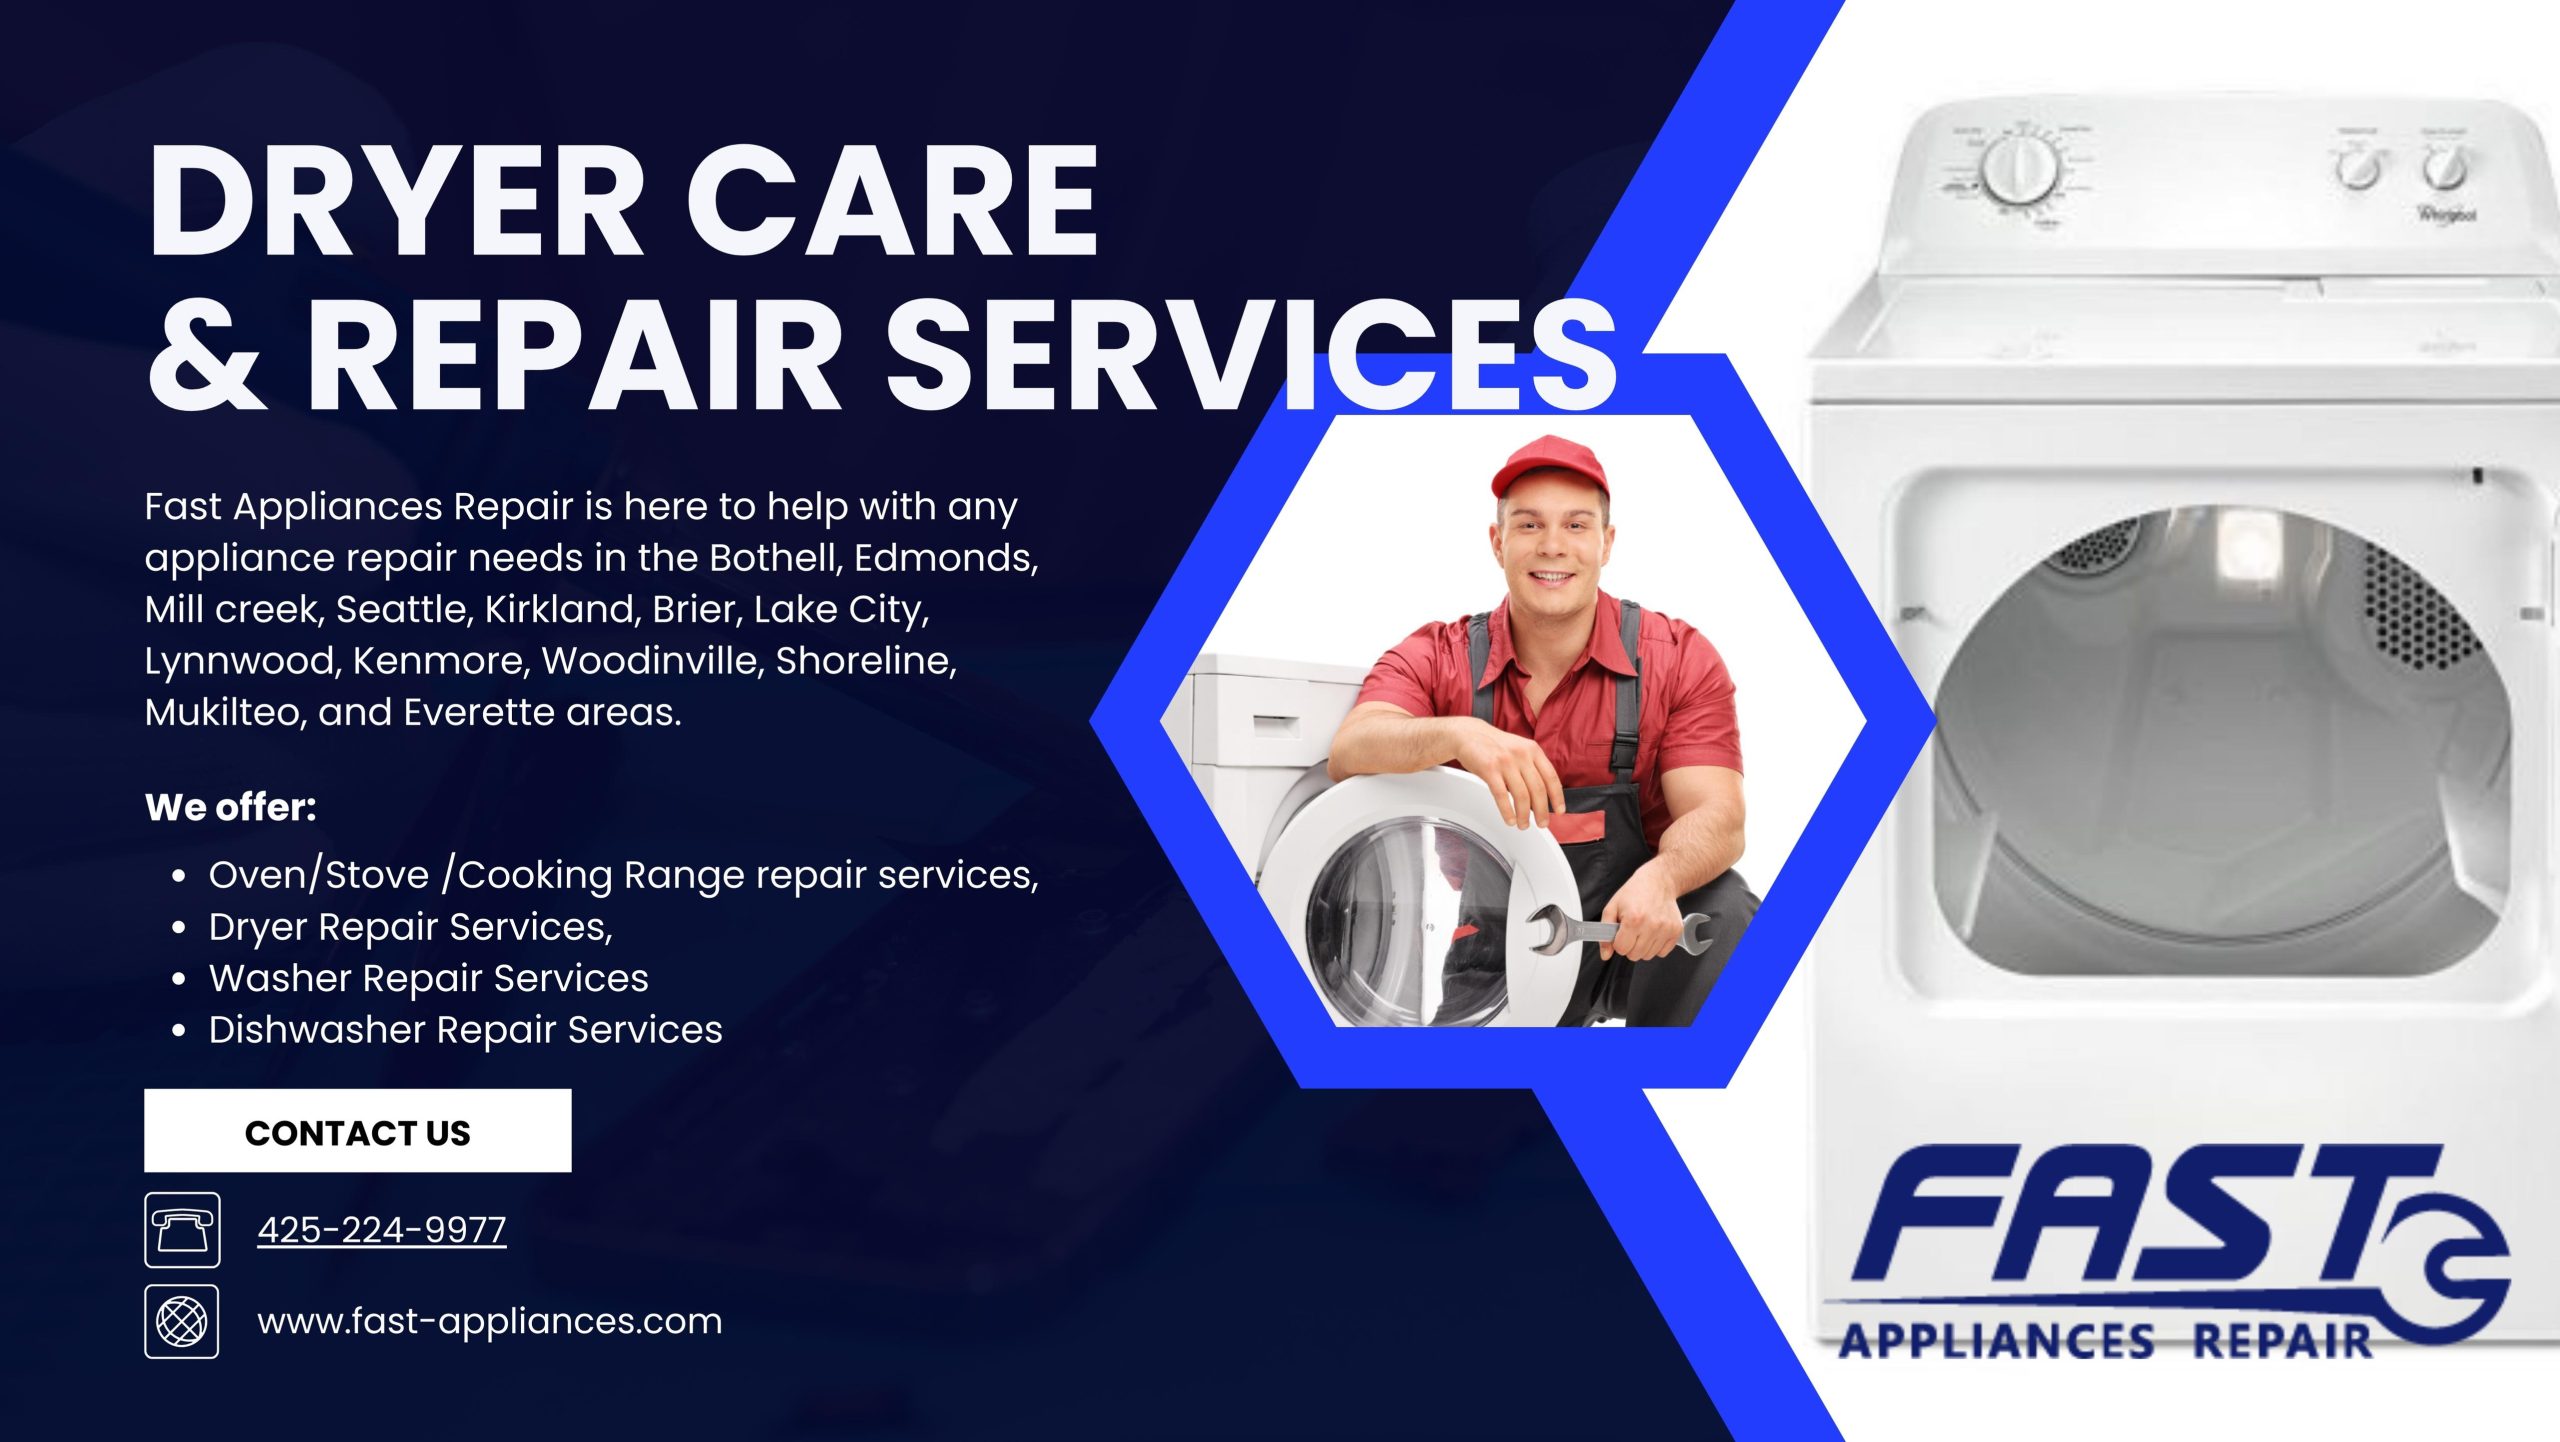 Dryer Care and Repair Services